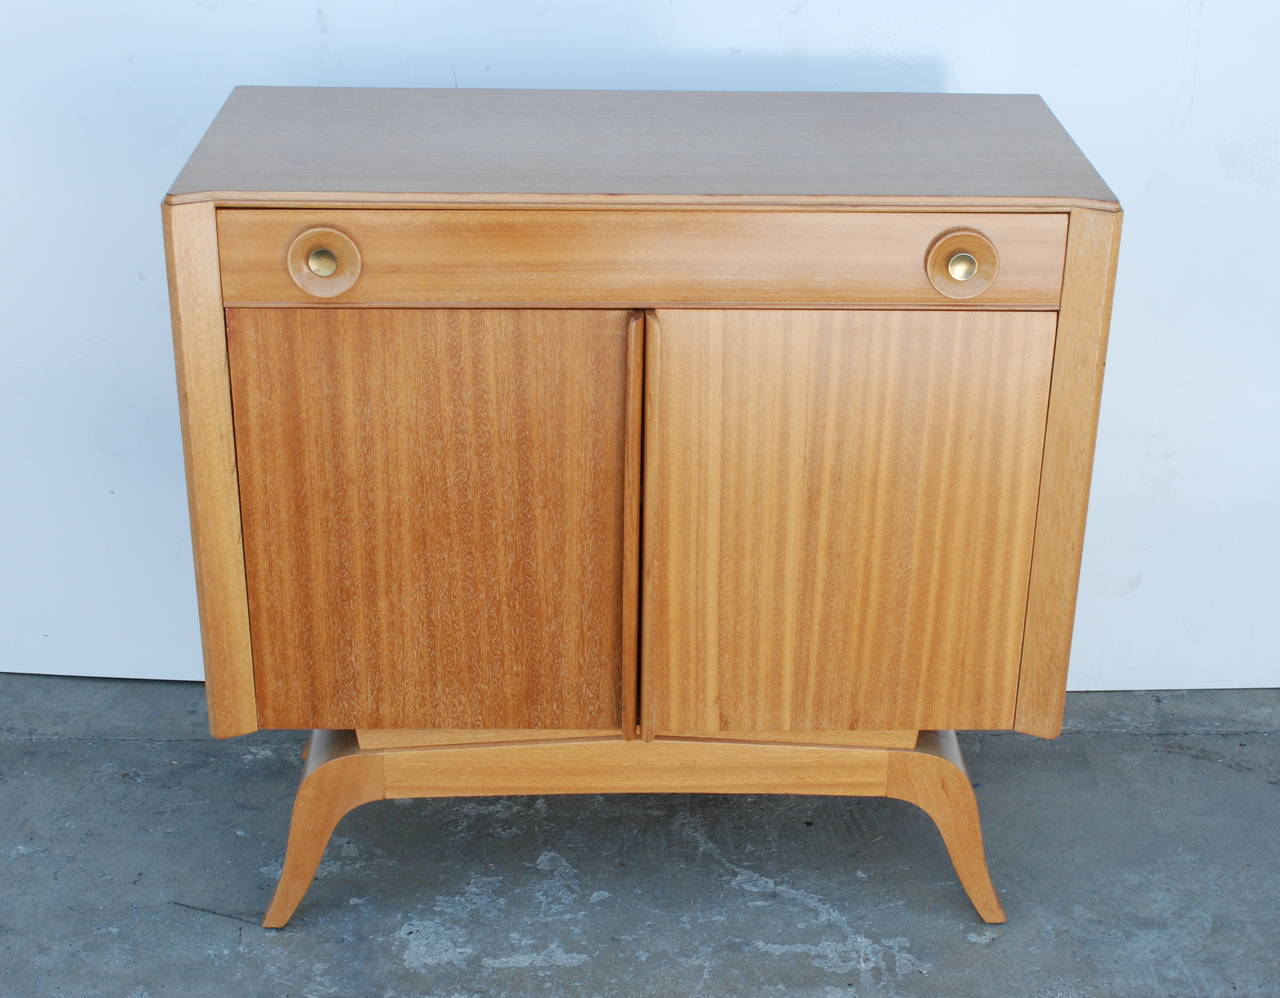 This sweet little cabinet attributed to Gilbert Rohde (1894-1944) would make a great dry bar. It is made of blonde mahogany. The top drawer face hinges open flat. The double bottom doors have integrated handles and open to reveal an interior shelf.